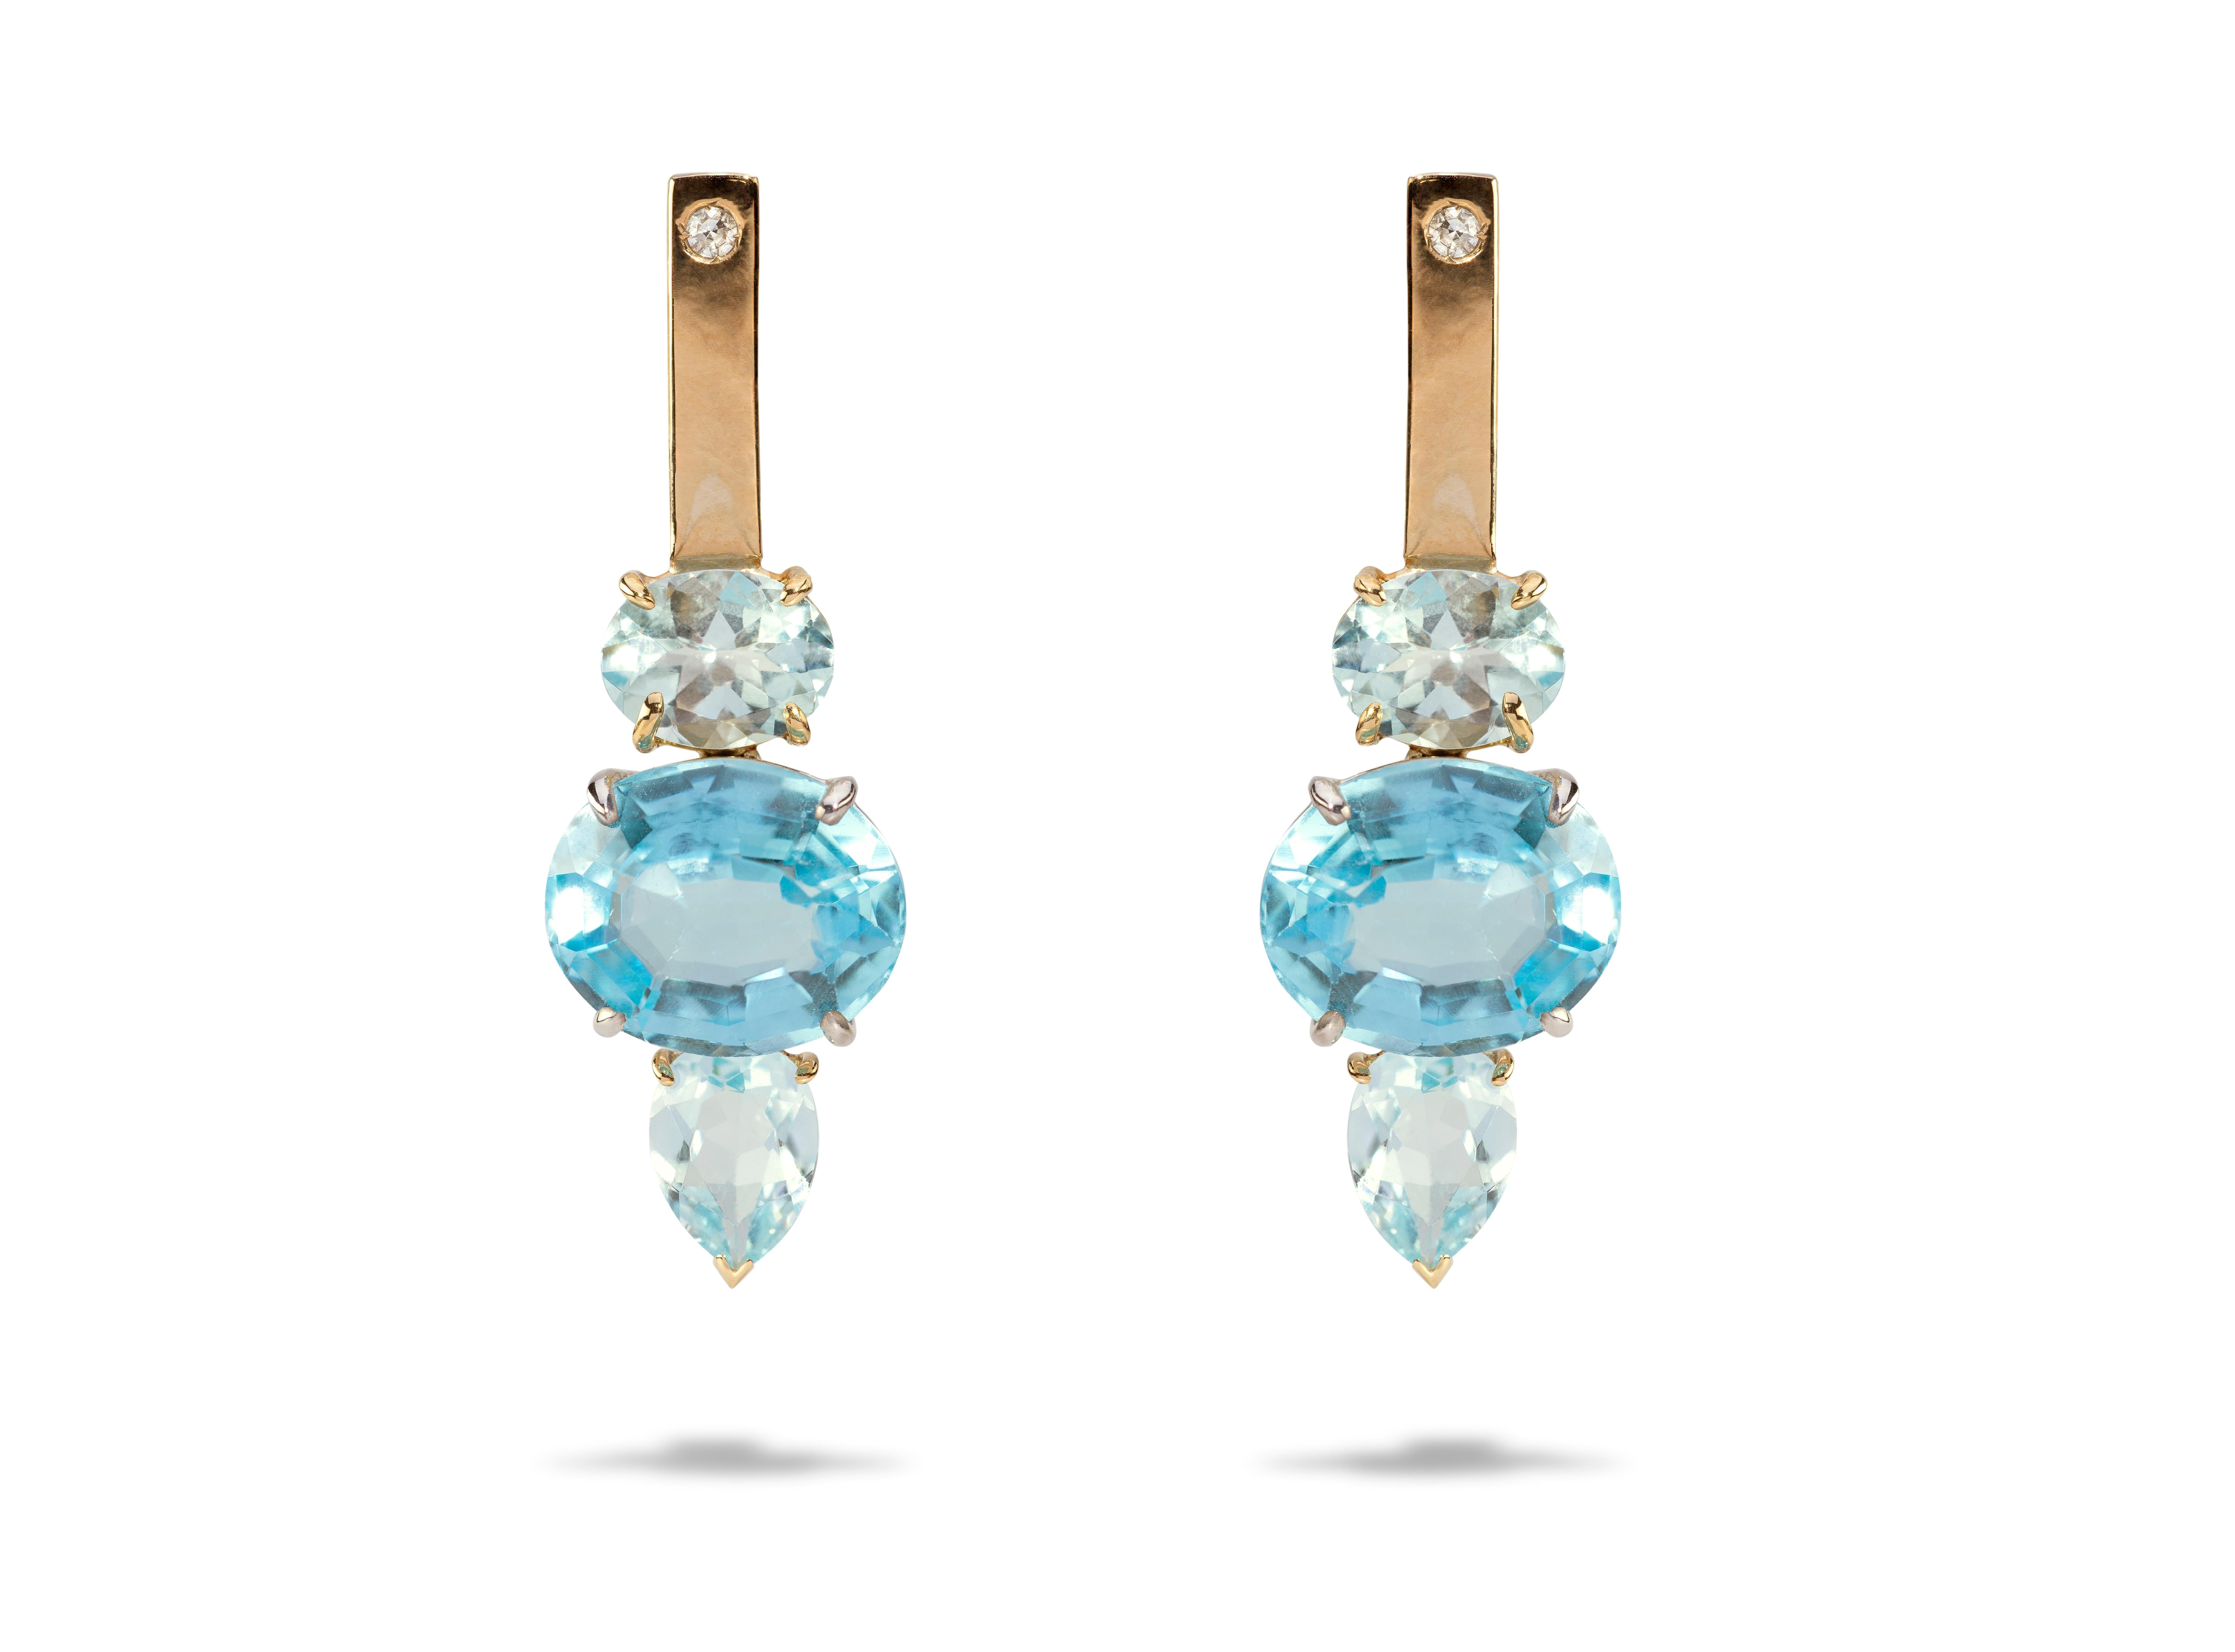  18 Karat Yellow&White Gold Blue Topaz 0.16 Karat White Diamonds Design Earrings
These earrings reminds of a dip in the ocean. The colour of the topaz is like the light blue of the clean water and the white diamonds are like the sea foam. Definitely